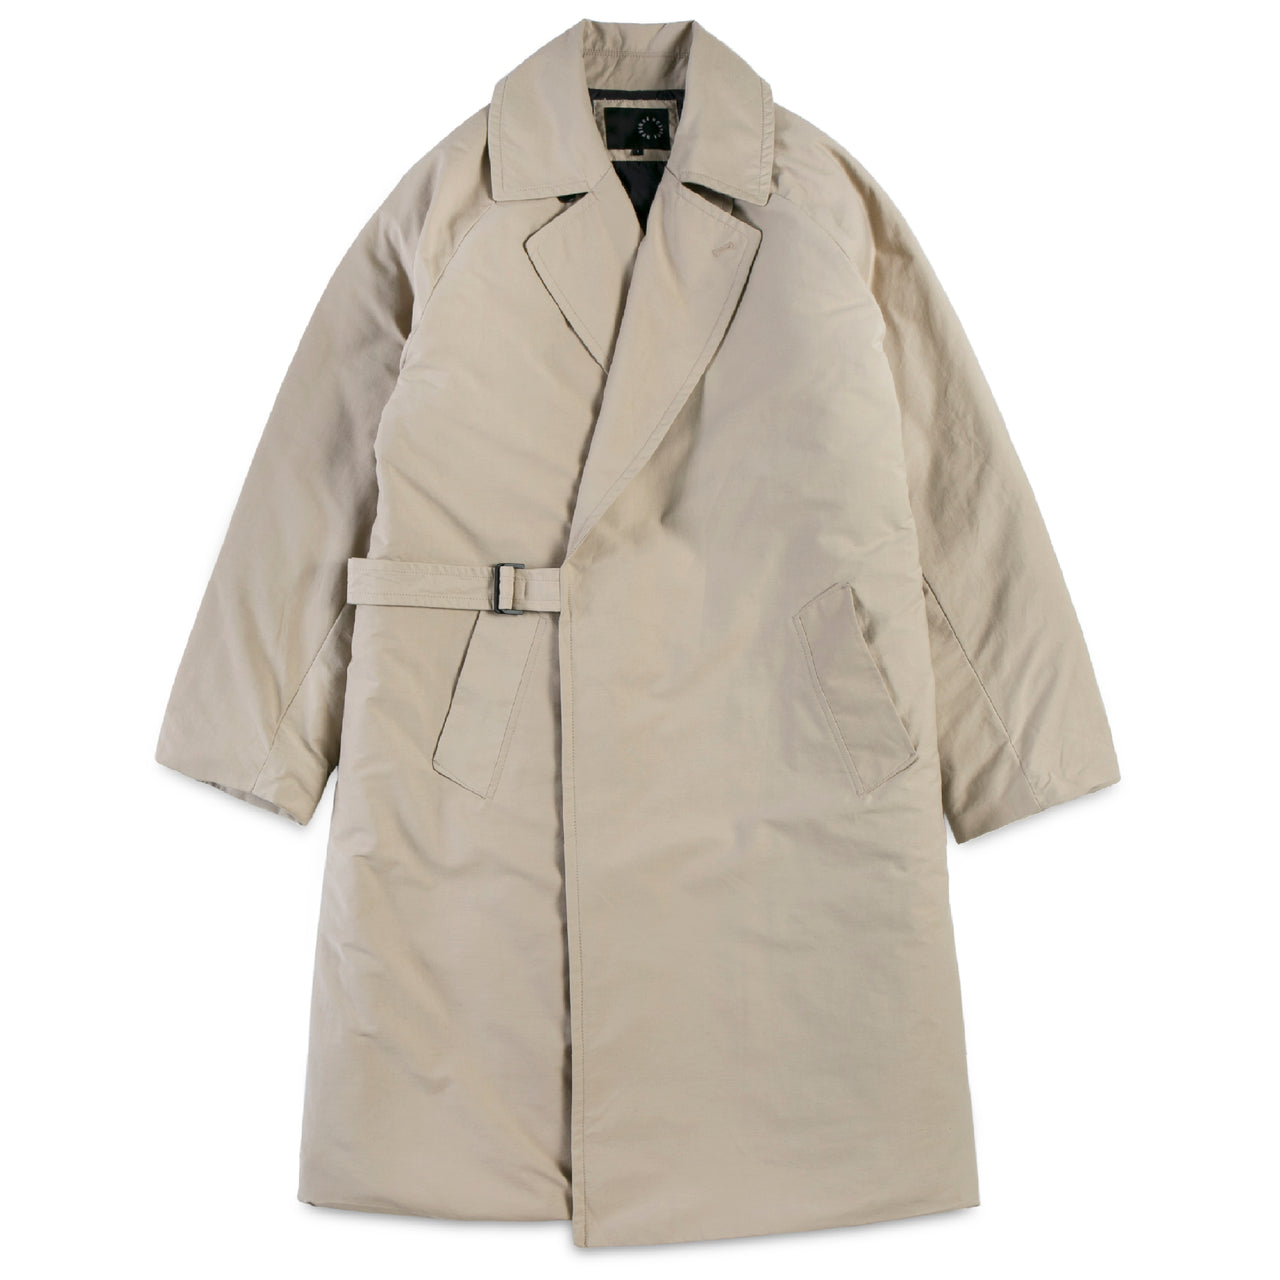 Nunique Trench Coat with Dexfil Cotton Layer